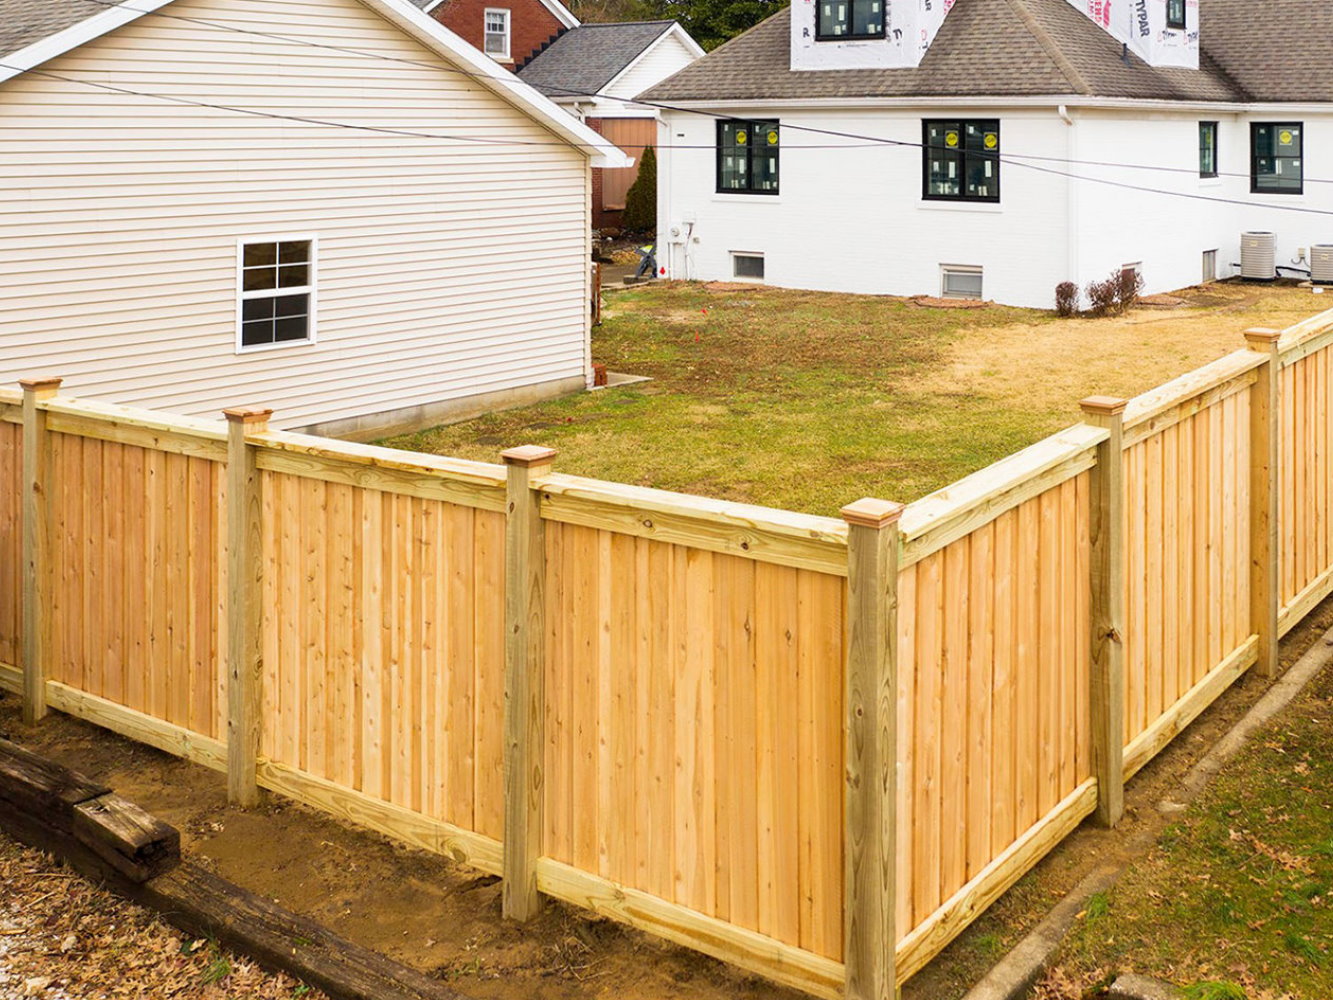 Lewisport KY cap and trim style wood fence